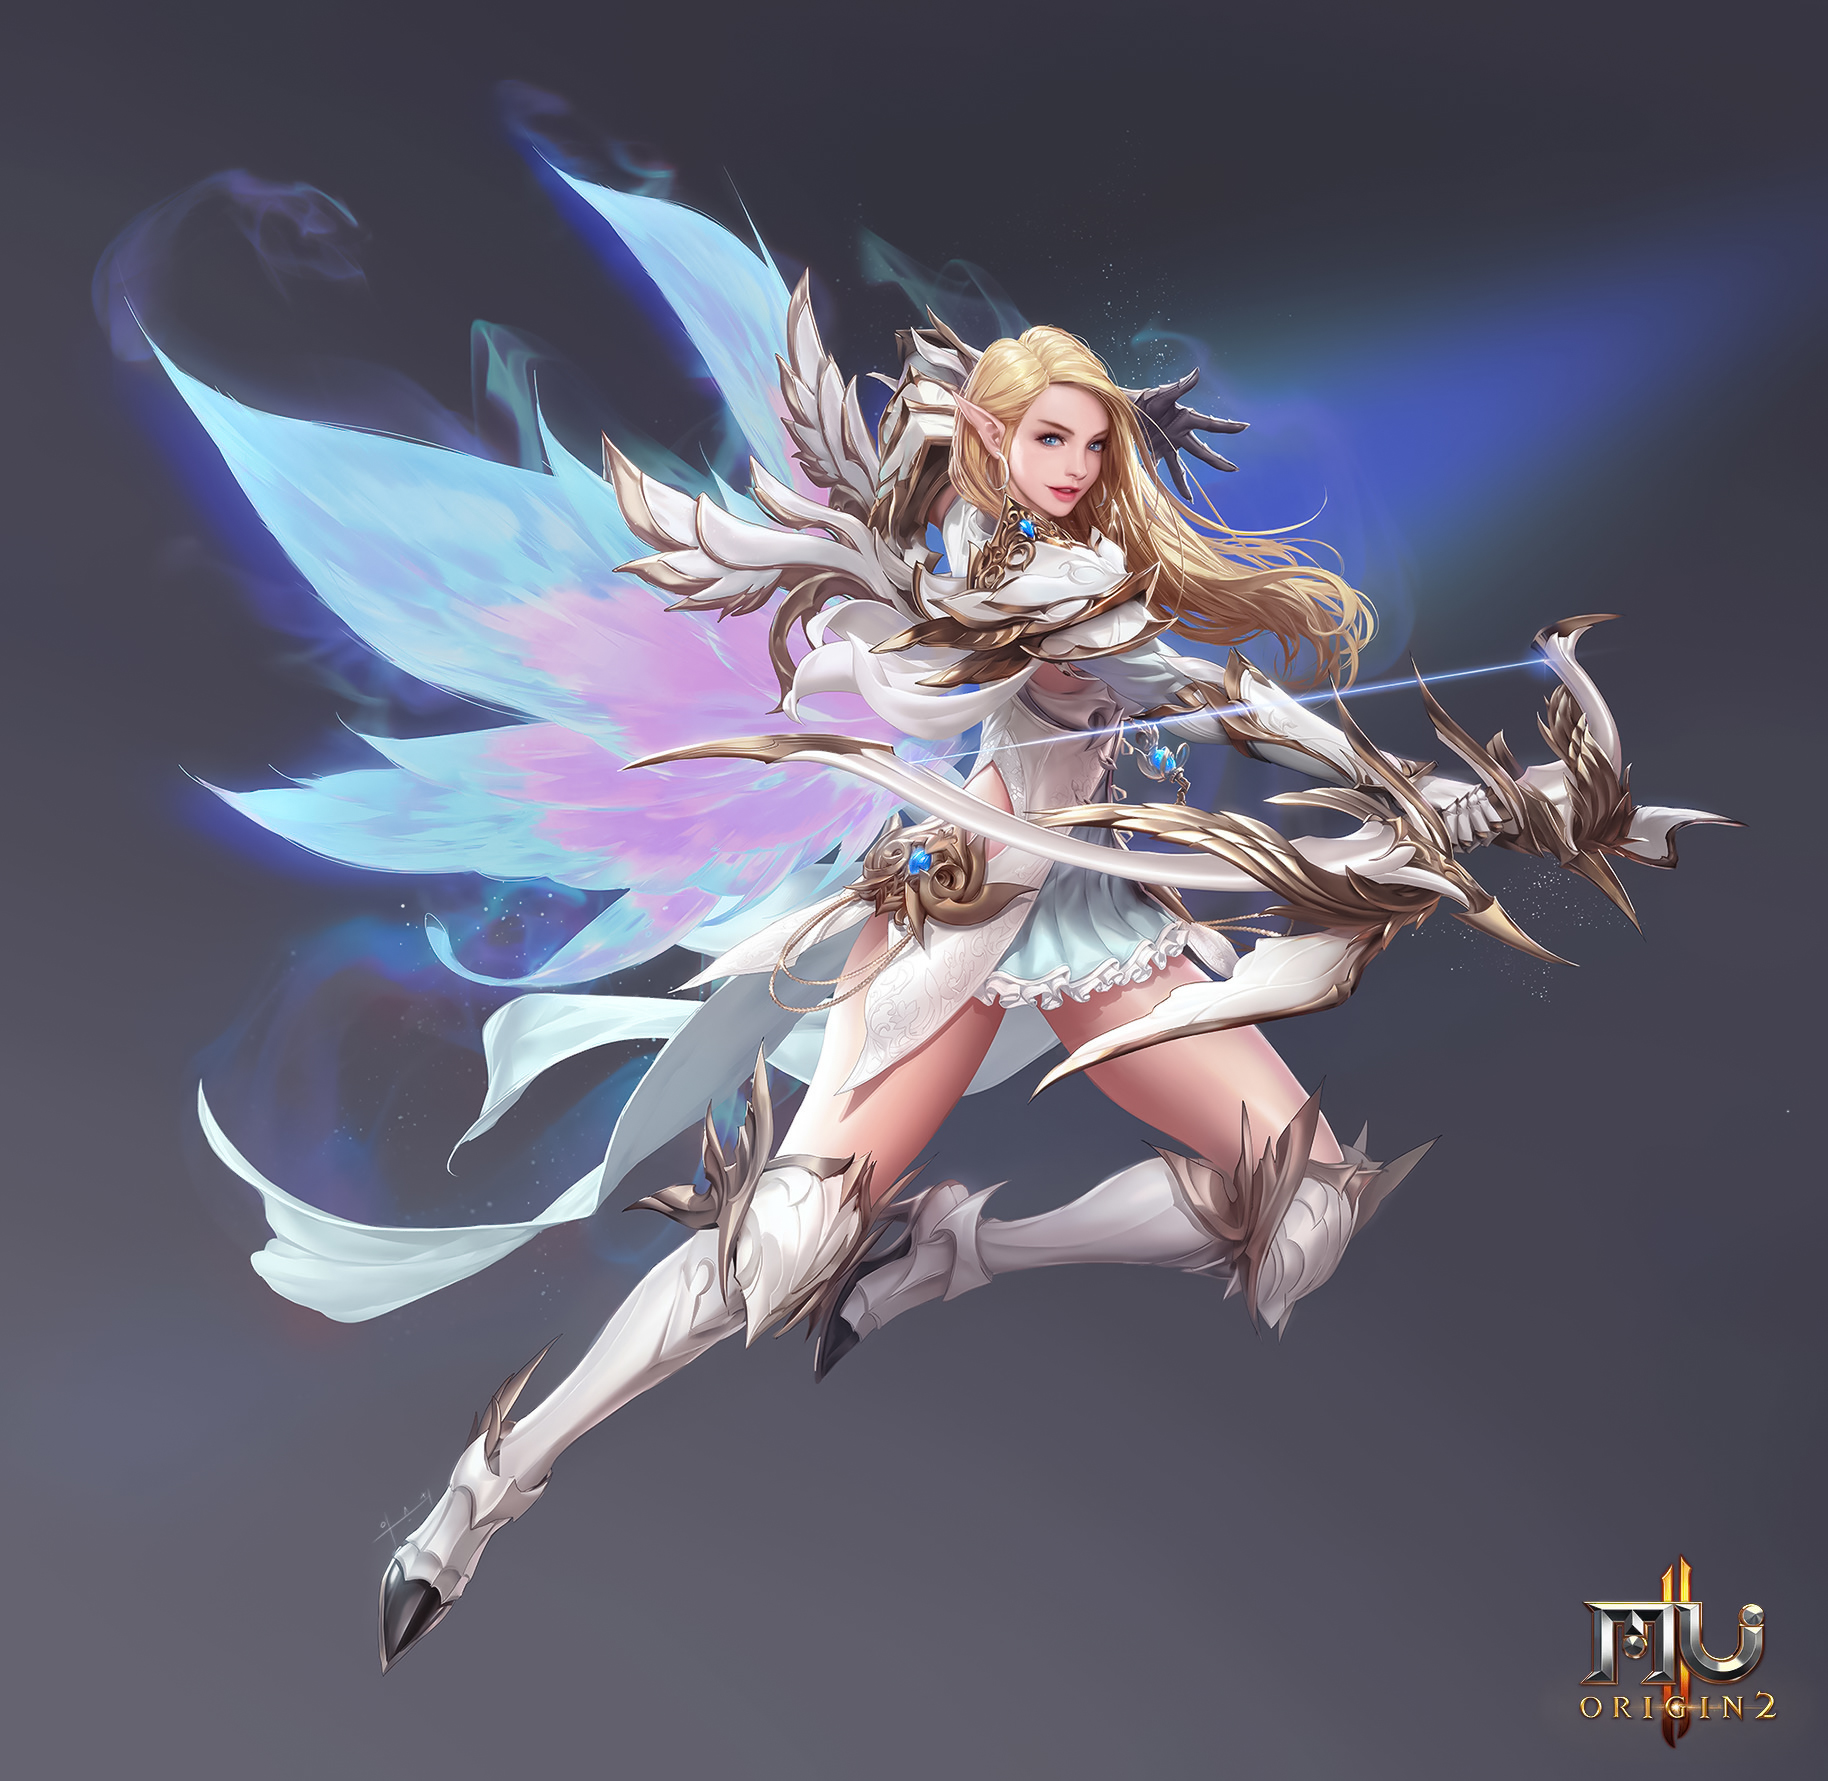 General 1828x1781 Seunghee Lee drawing women blonde long hair archer bow wings fantasy art fighting simple background